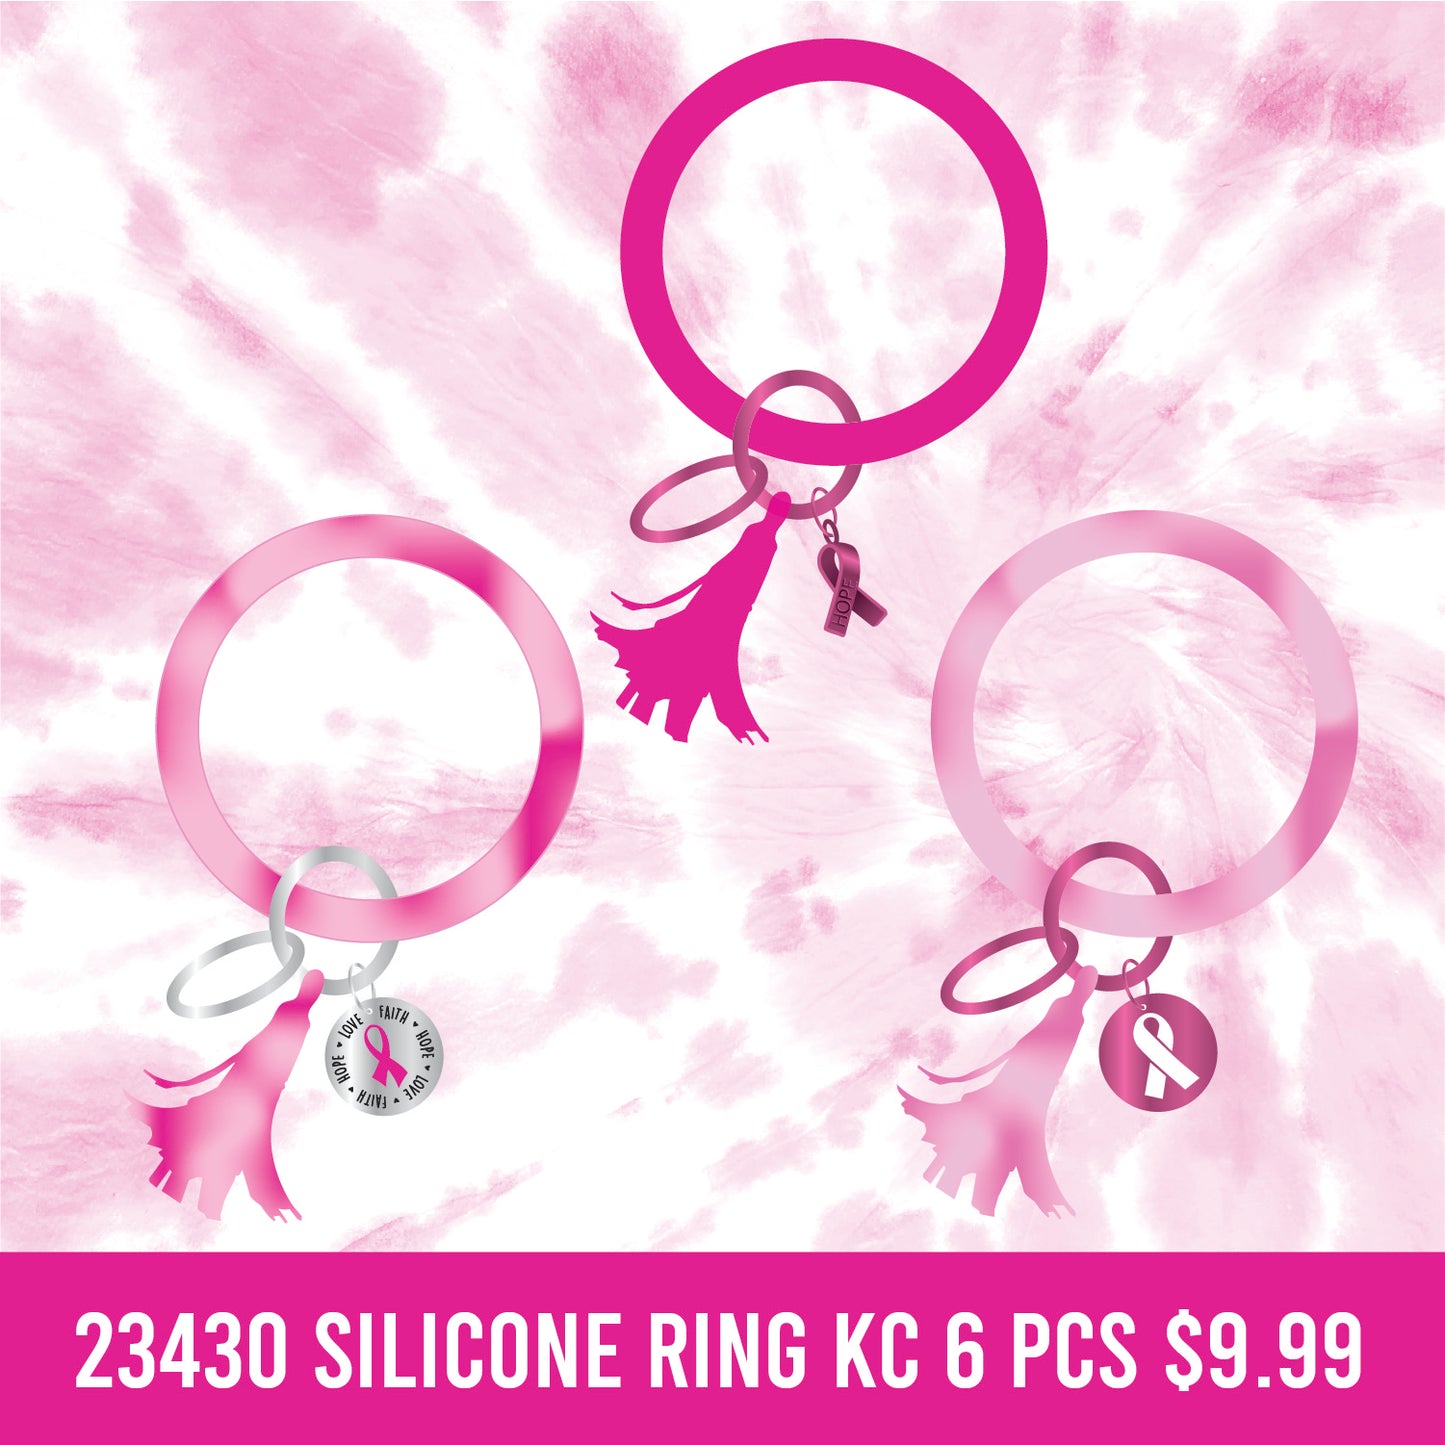 ITEM NUMBER 023430L PINK SILICONE RING KC - STORE SURPLUS NO DISPLAY 6 PIECES PER PACK